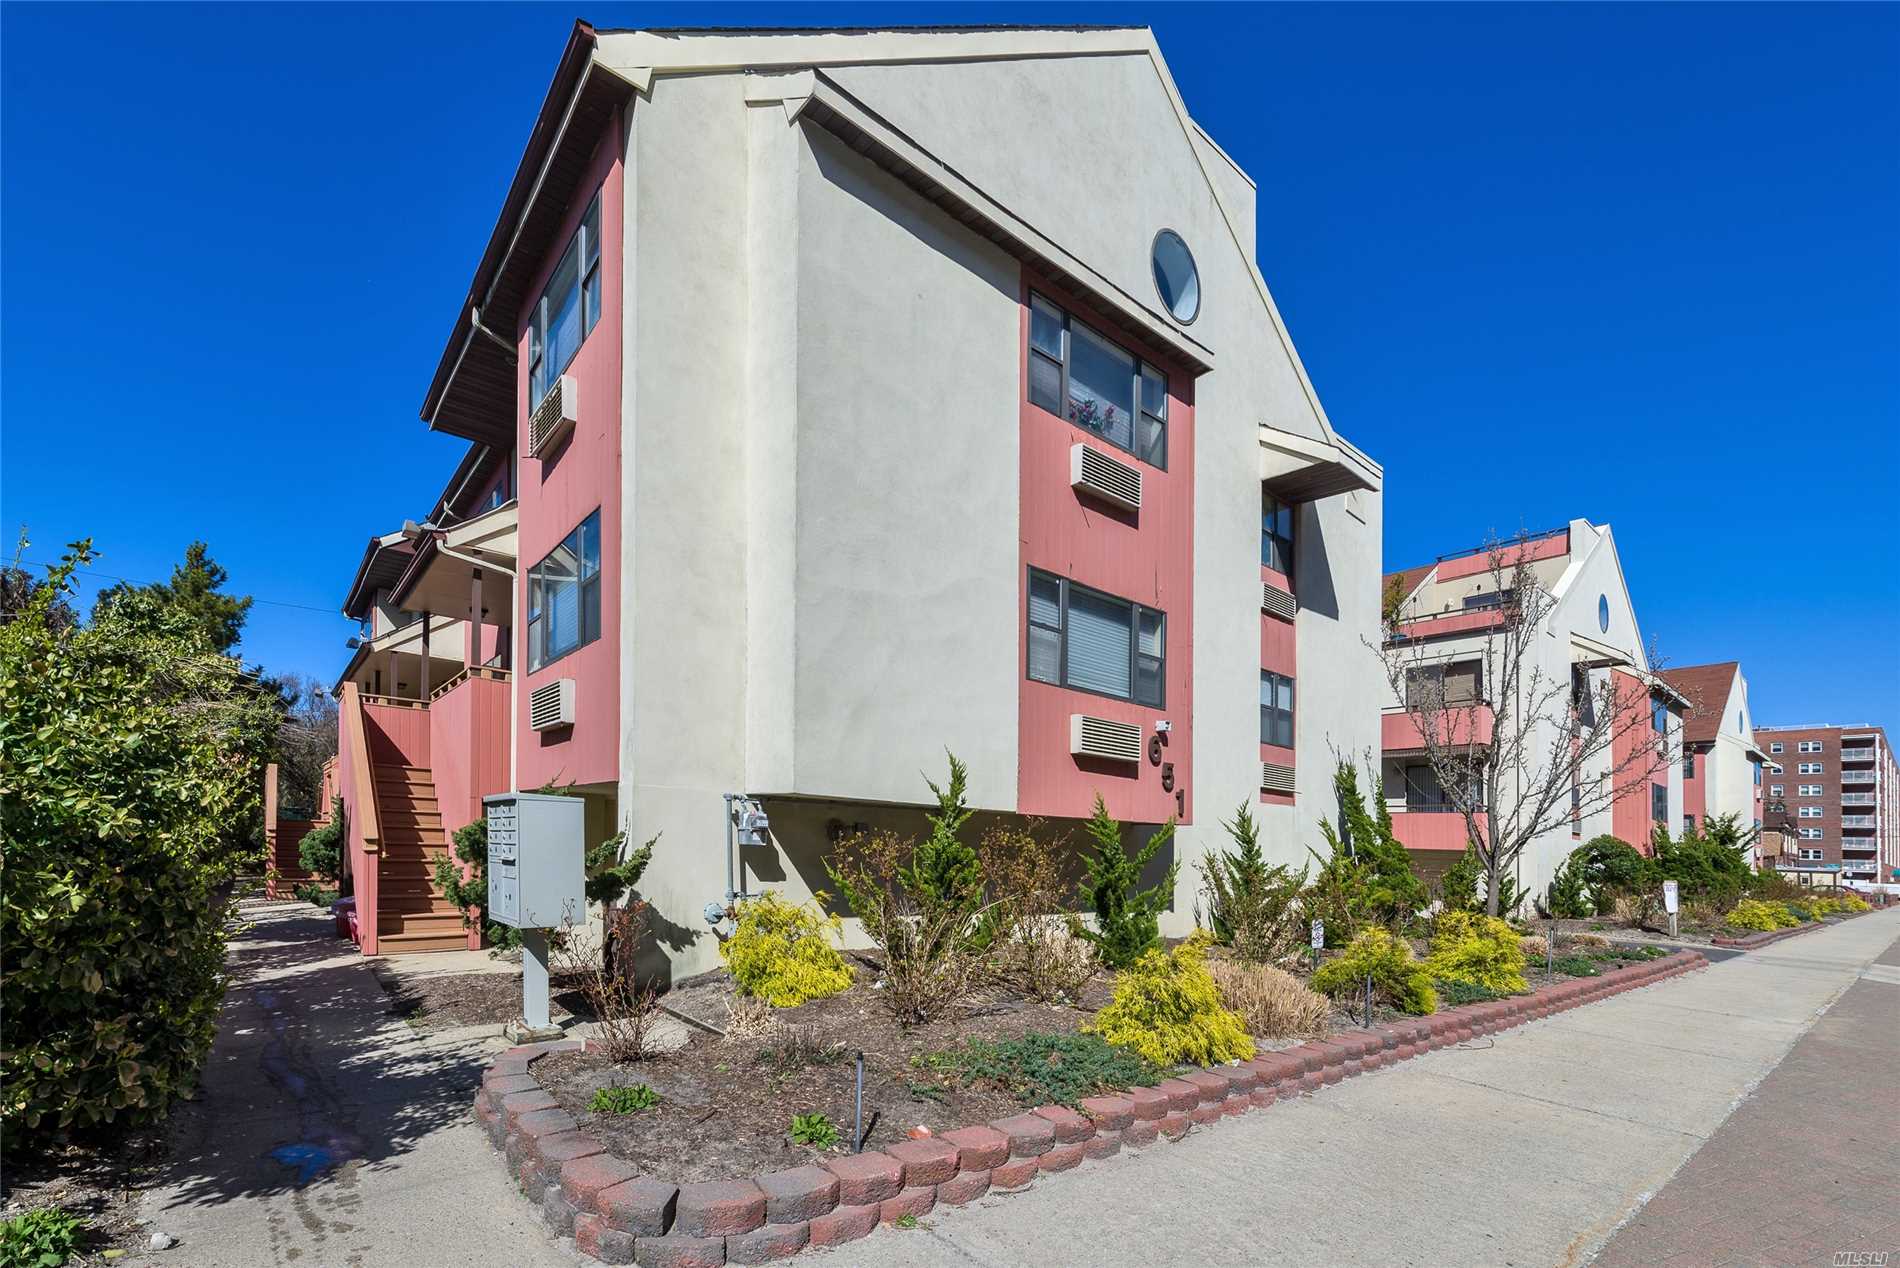 Long Beach, Dog And Cat Friendly, Newly Renovated 2 Bedroom, 2 Bath Condominium Townhome, Stainless Appliances, Glass Tile Backsplash, Washer Dryer In Unit, Slight Oceanview, Two Car Piggyback Garage, Ceramic Wood Look Tile Floors, Must See!